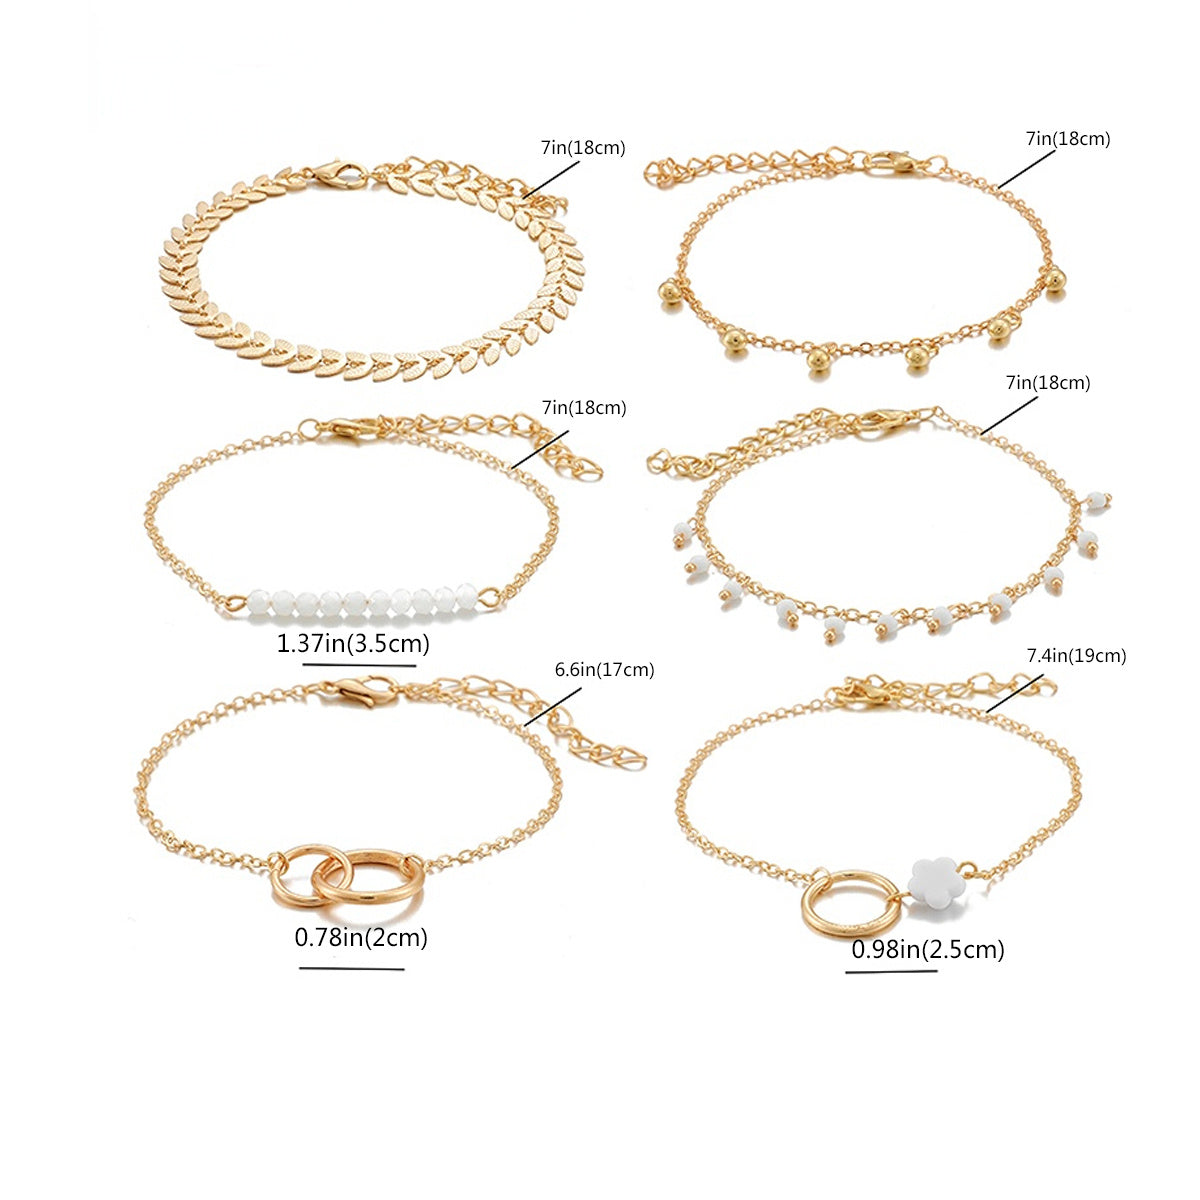 Upgrade Your Jewelry Game with 6-Piece Stackable Chain Bracelet Set Featuring Hollow Out Geometry and Adjustable Tassel